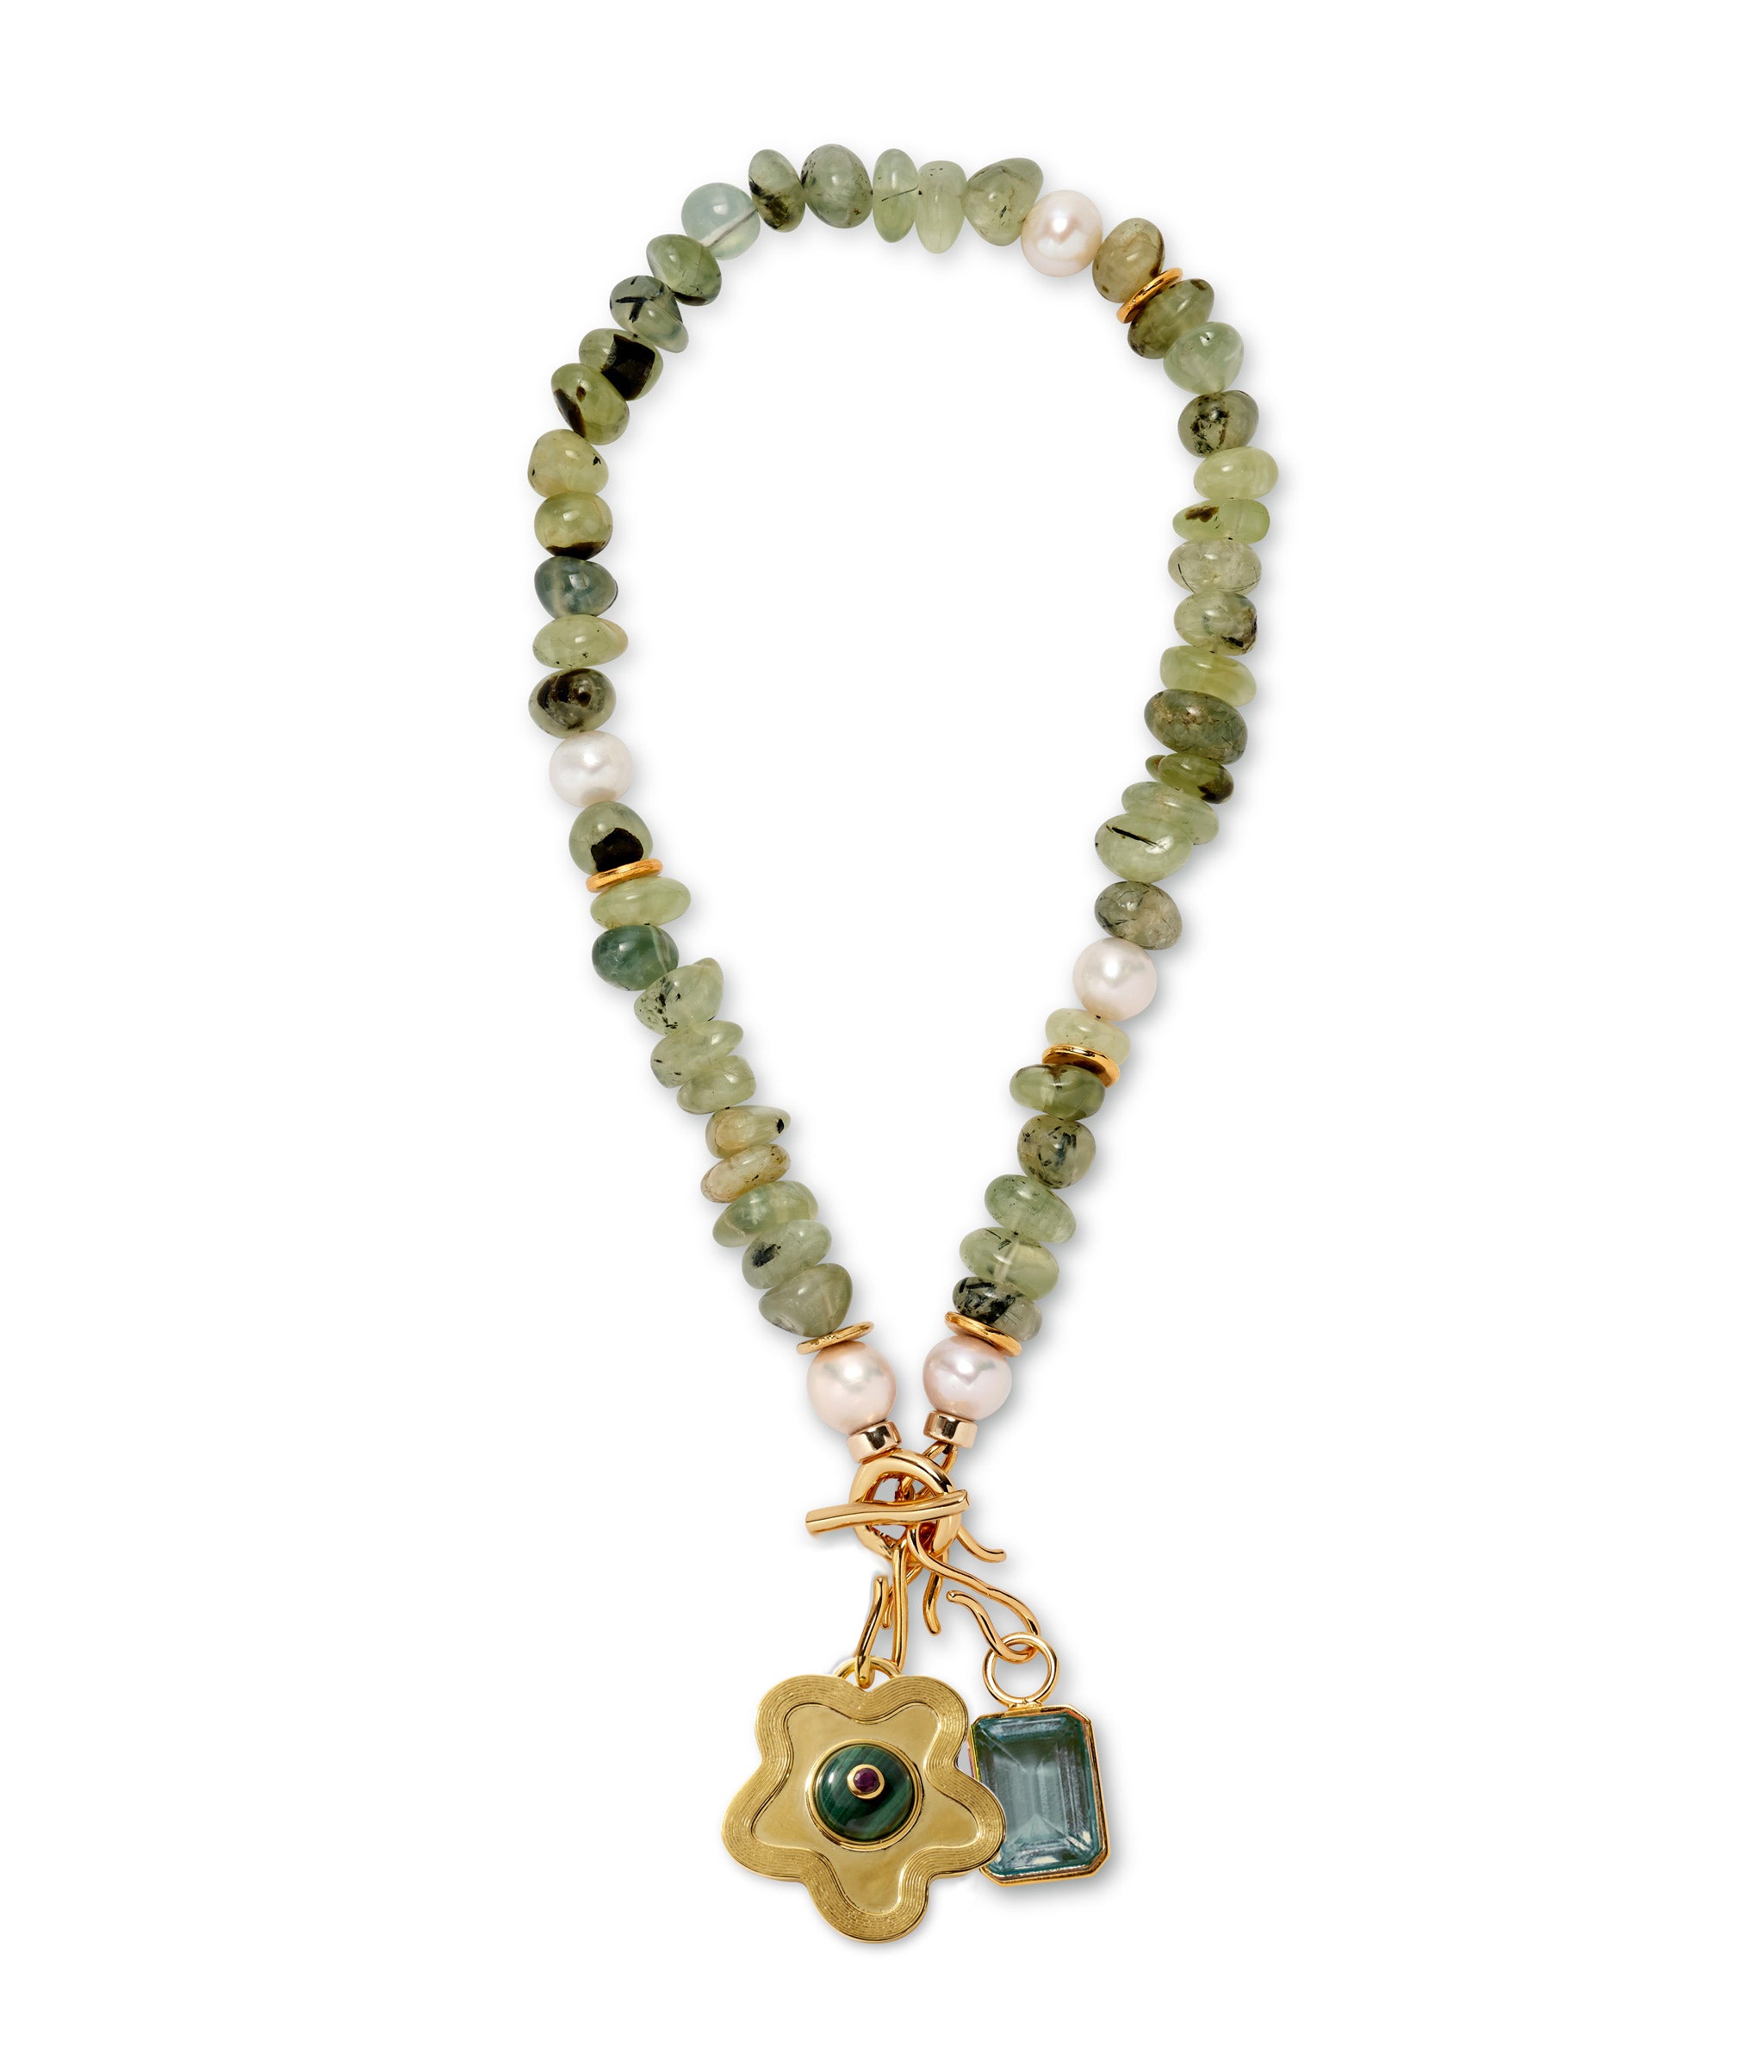 Mood Necklace in Prehnite with Nana Pendant in Shasta Daisy and Candyland Charm in Teal.